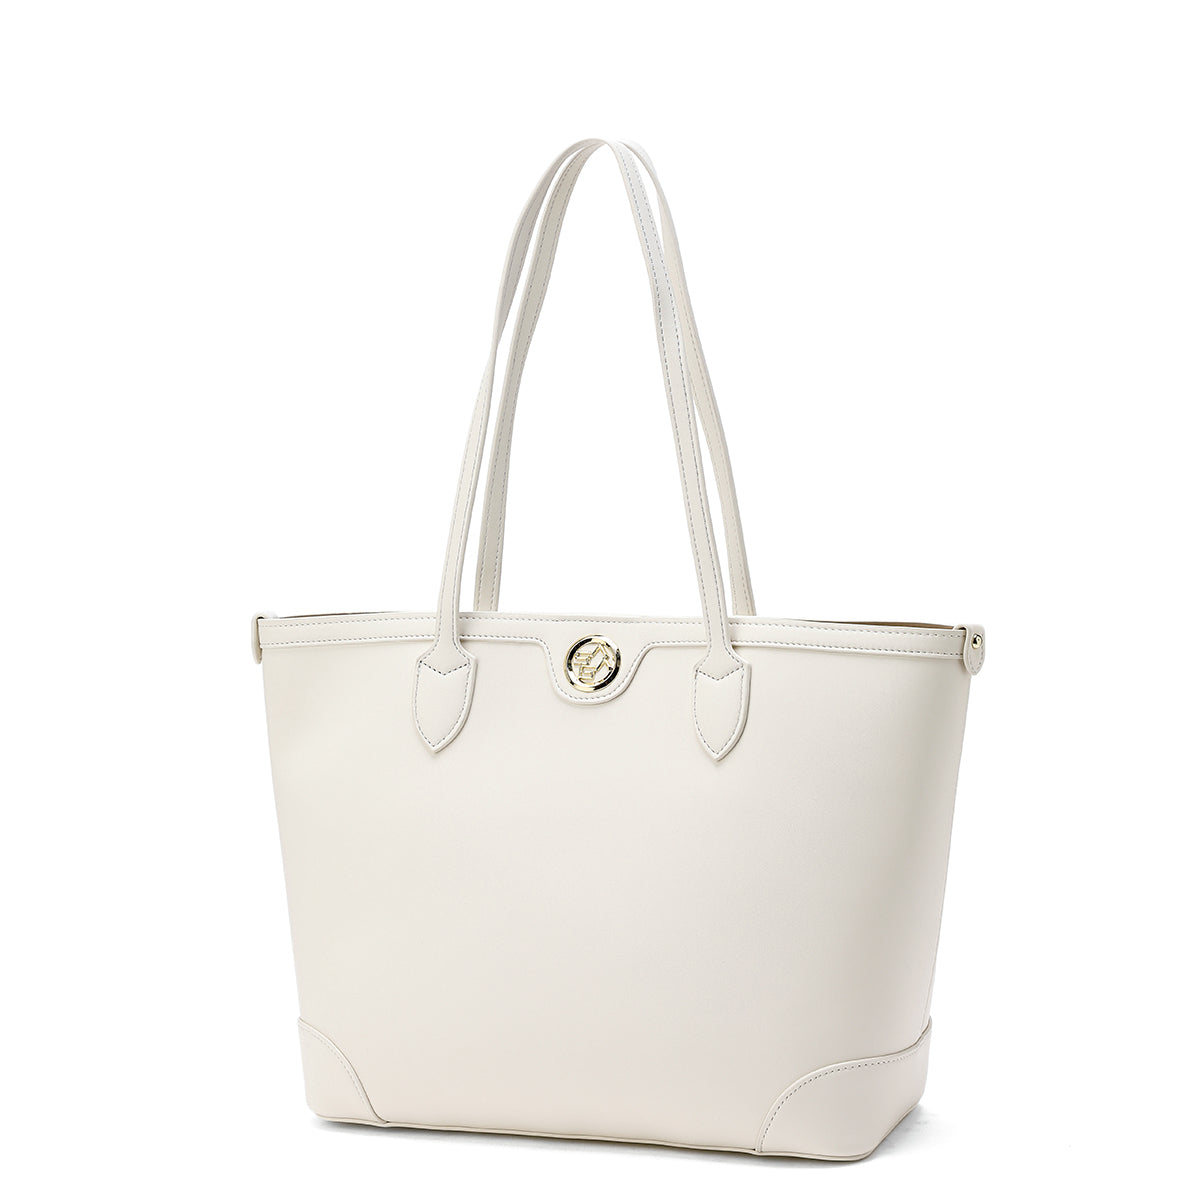 Simple and spacious bag, 39 cm wide, cream or brown color